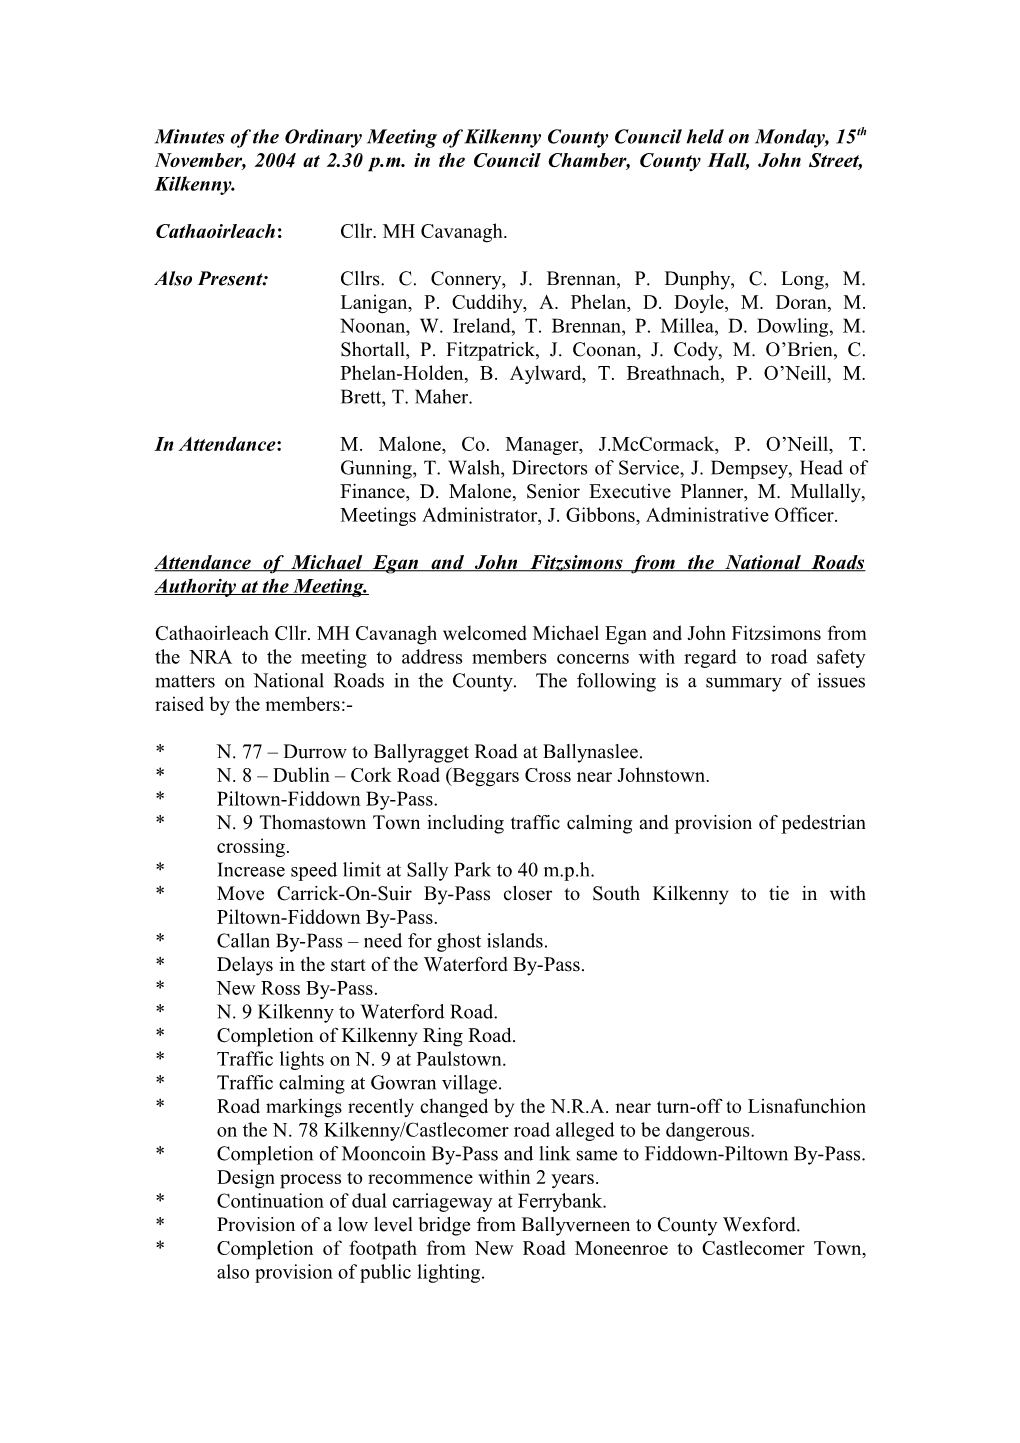 Minutes of the Ordinary Meeting of Kilkenny County Council Held on Monday, 15Th November